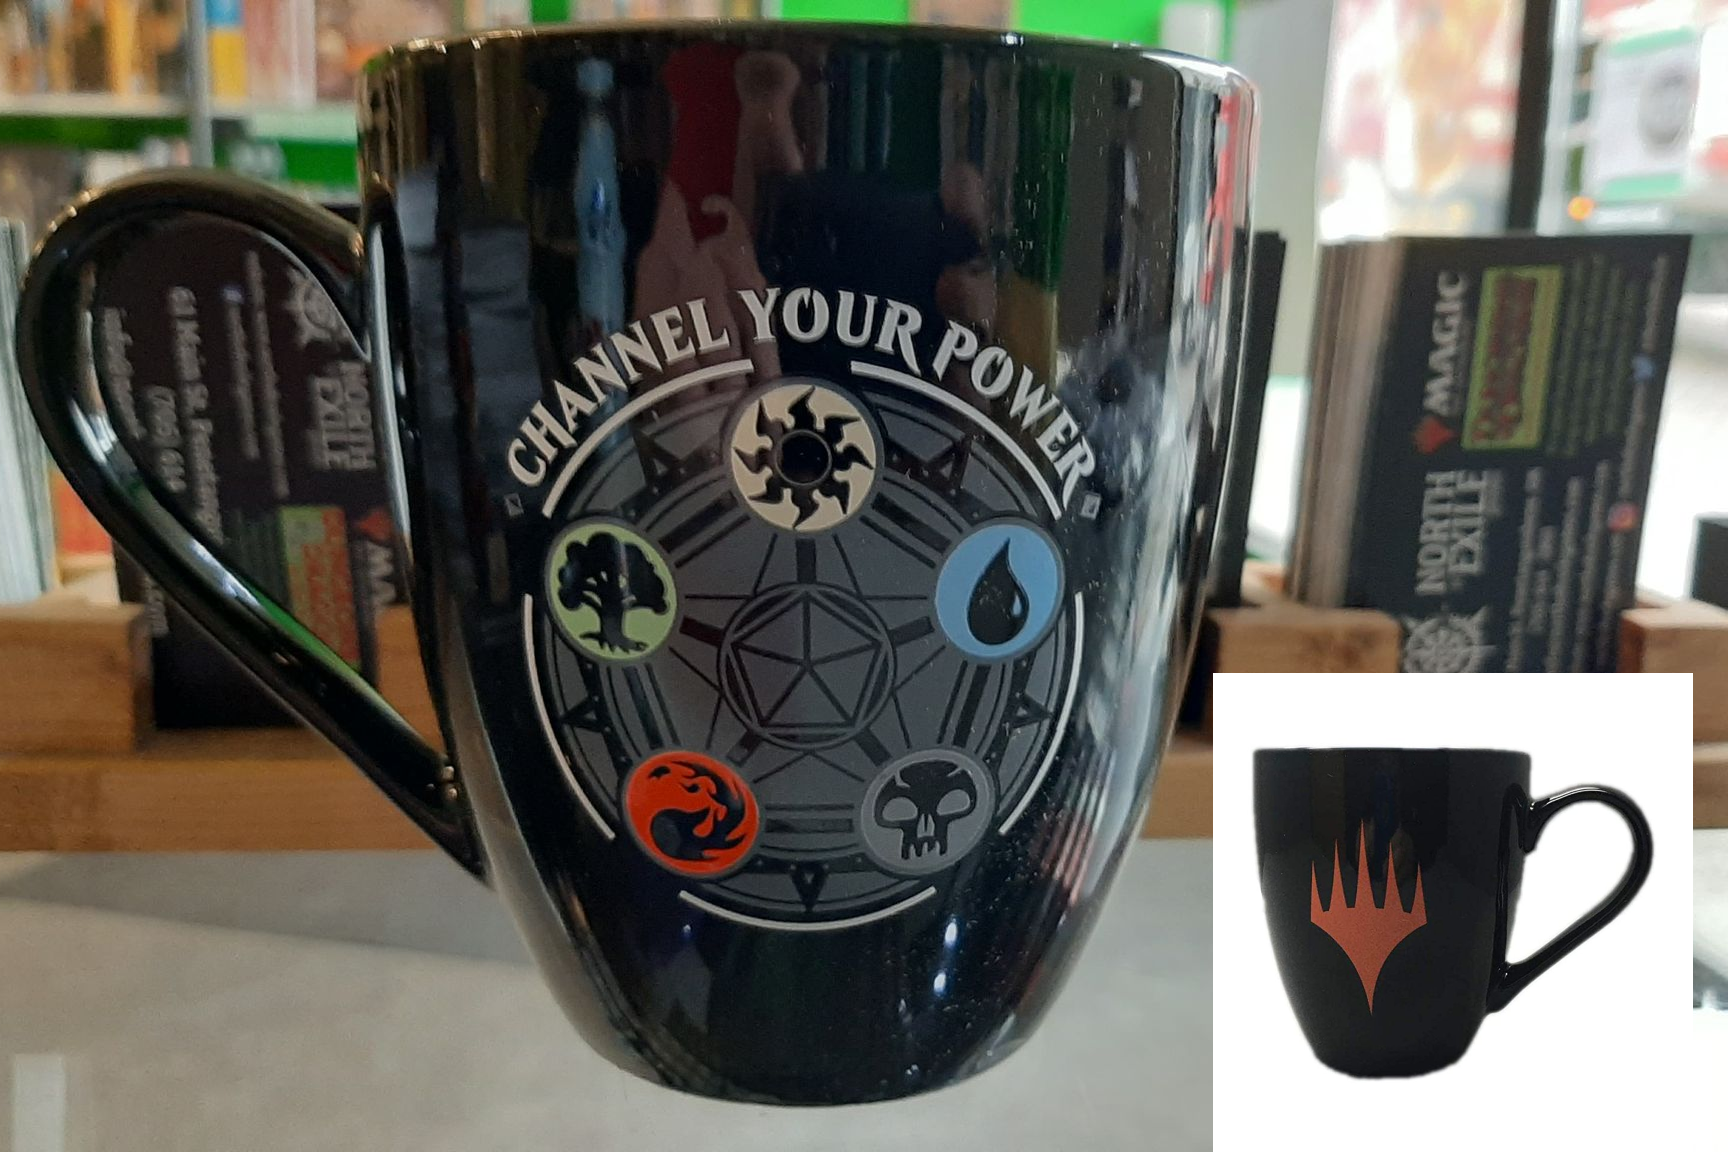 Coffee mug - (Magic The Gathering) "Channel your power" | North of Exile Games